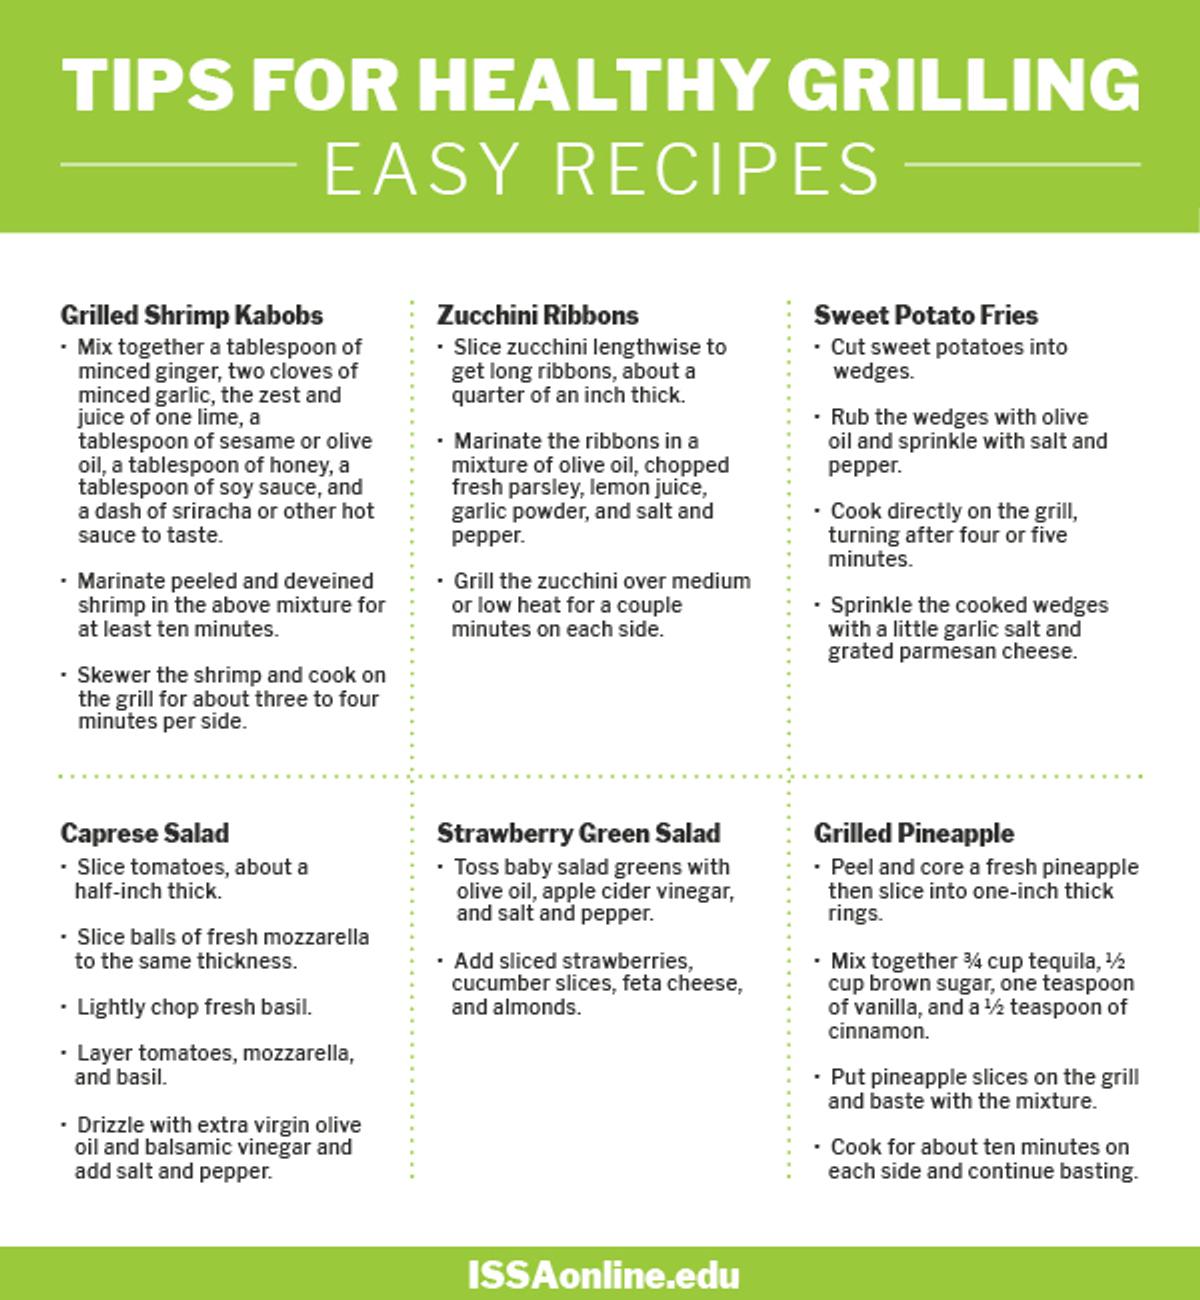 Tips for Healthy Grilling